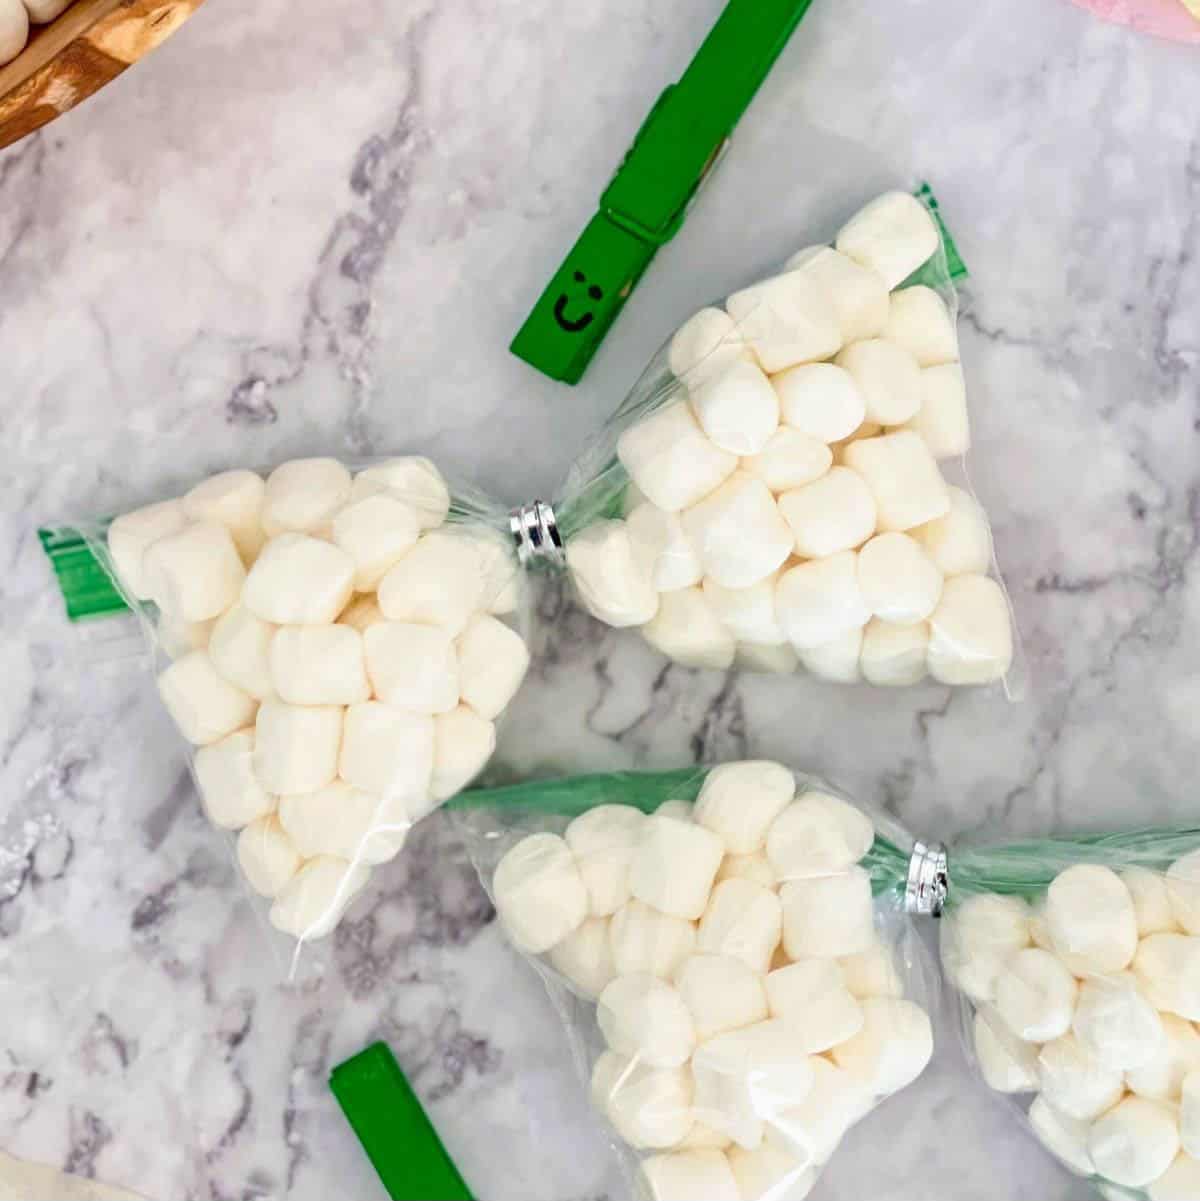 Snack bags with marshmallows are cinched in half using twist ties.